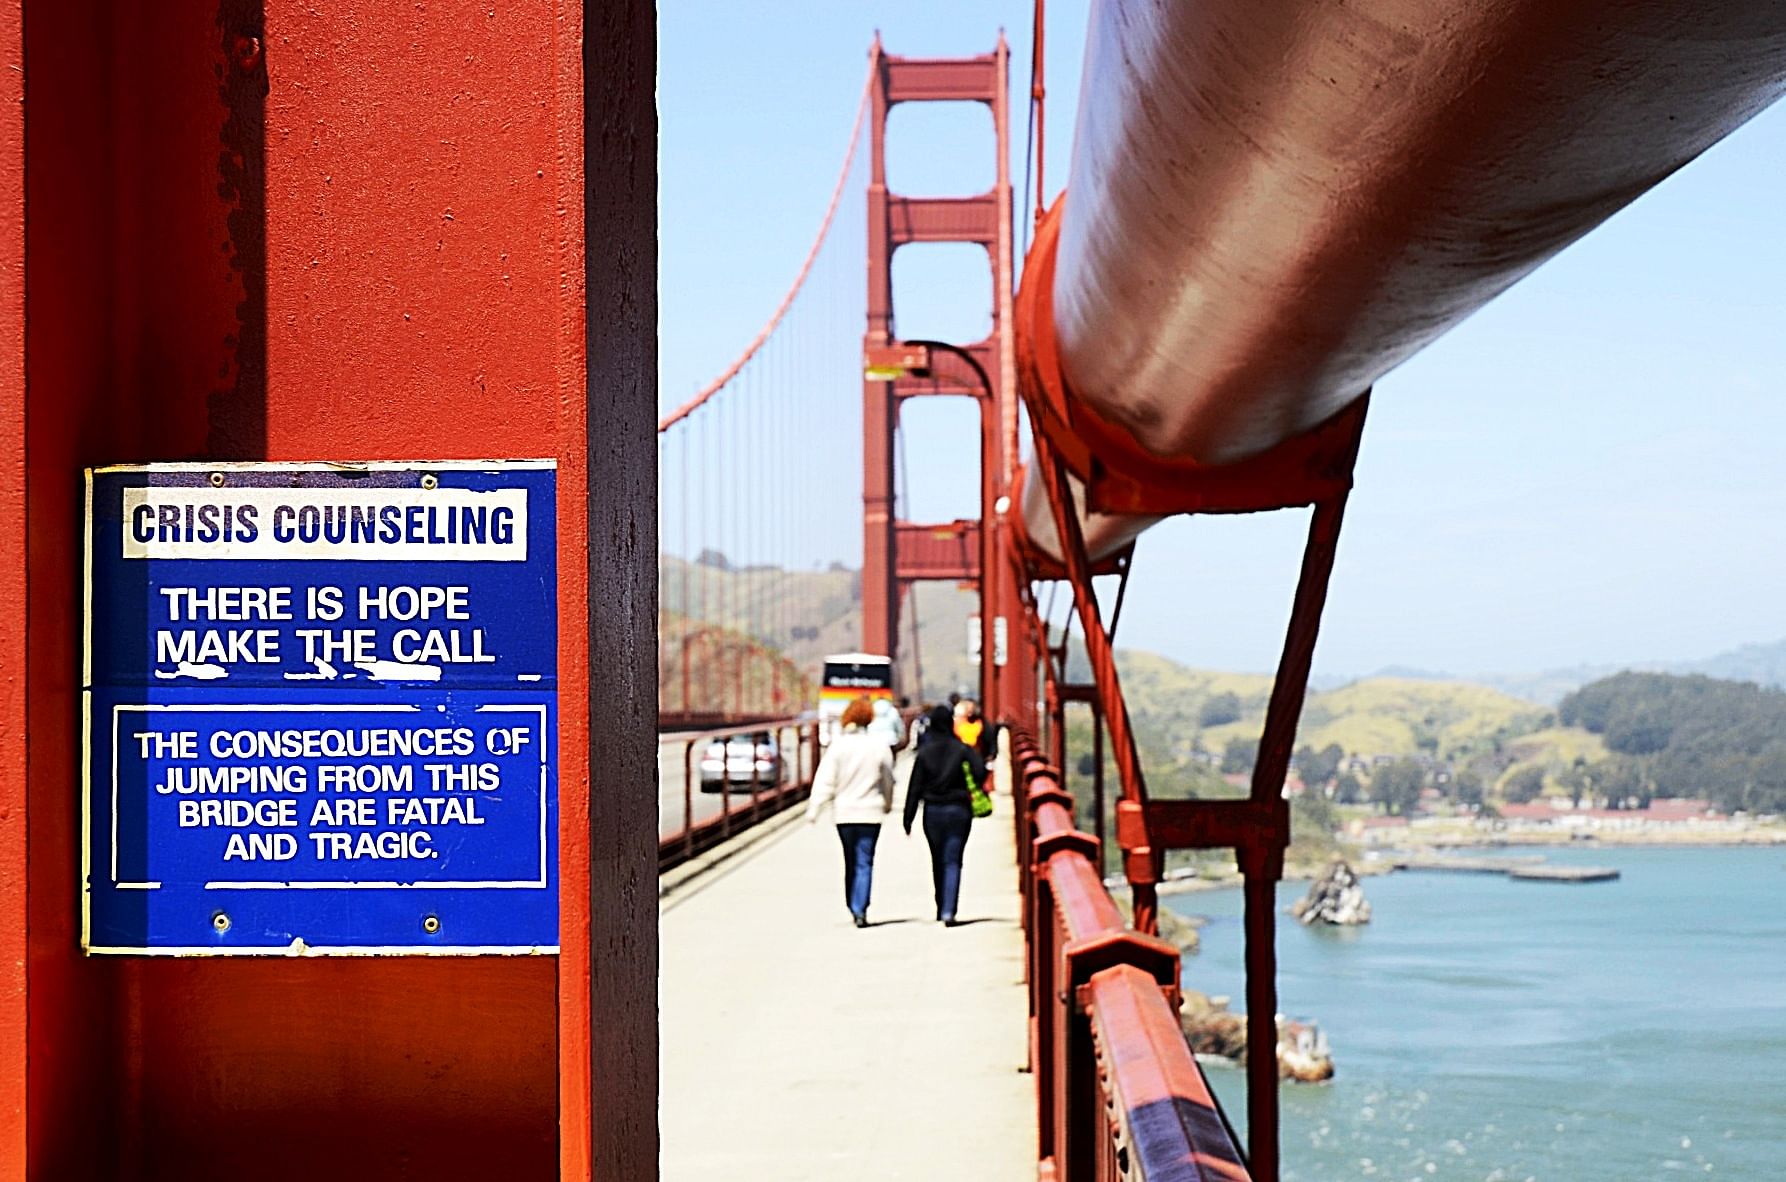 Golden Gate Bridge finally installs anti-suicide nets after years